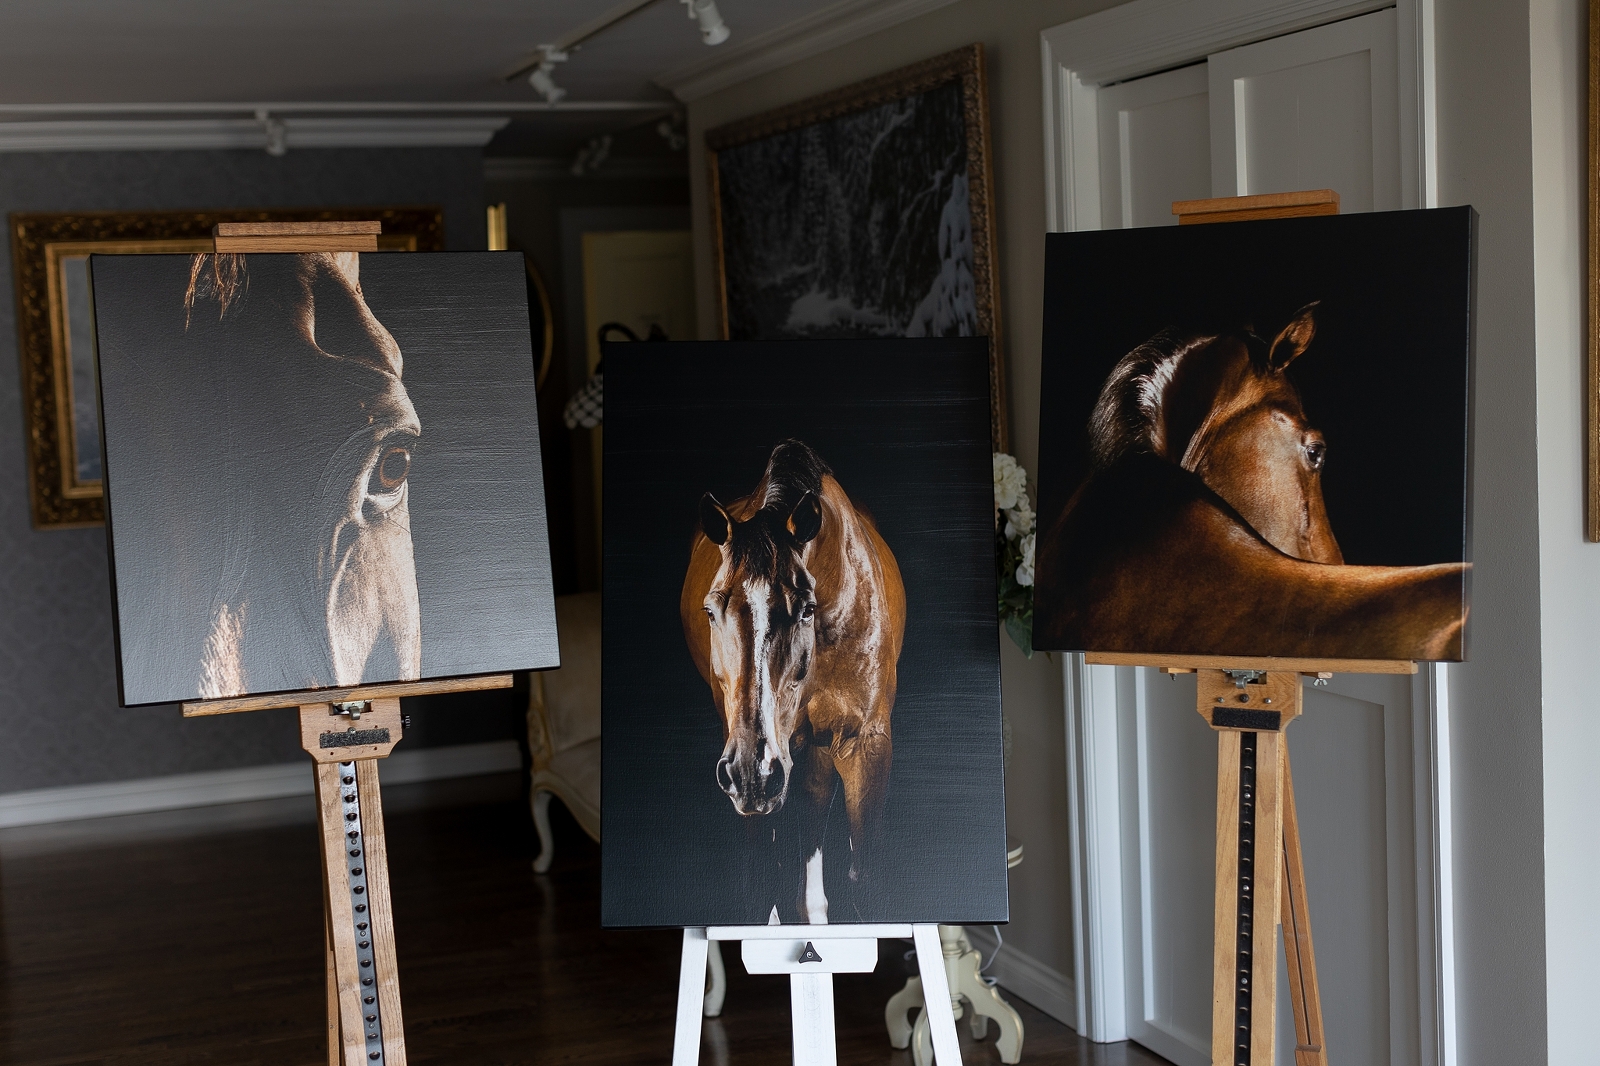 Three horse portrait paintings displayed on easels in an indoor setting.